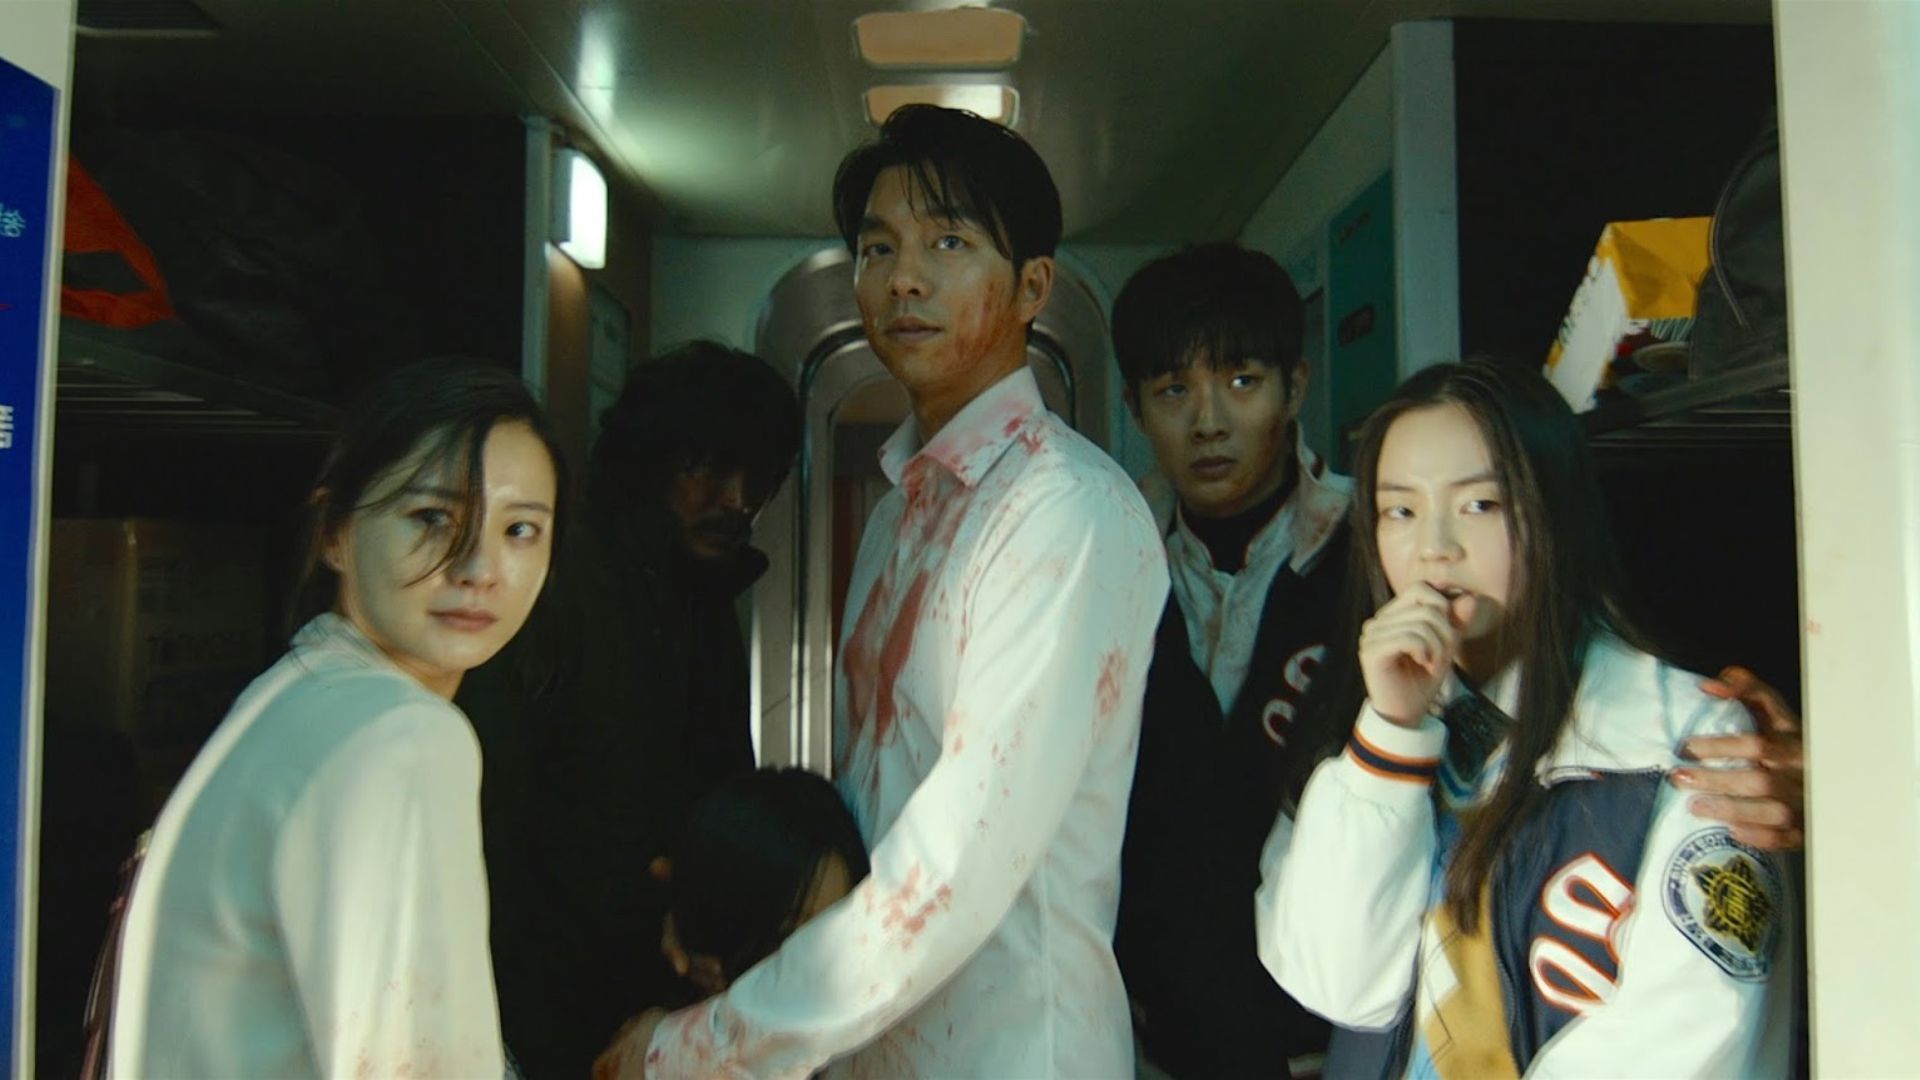 Underrated horror fim: Train to busan